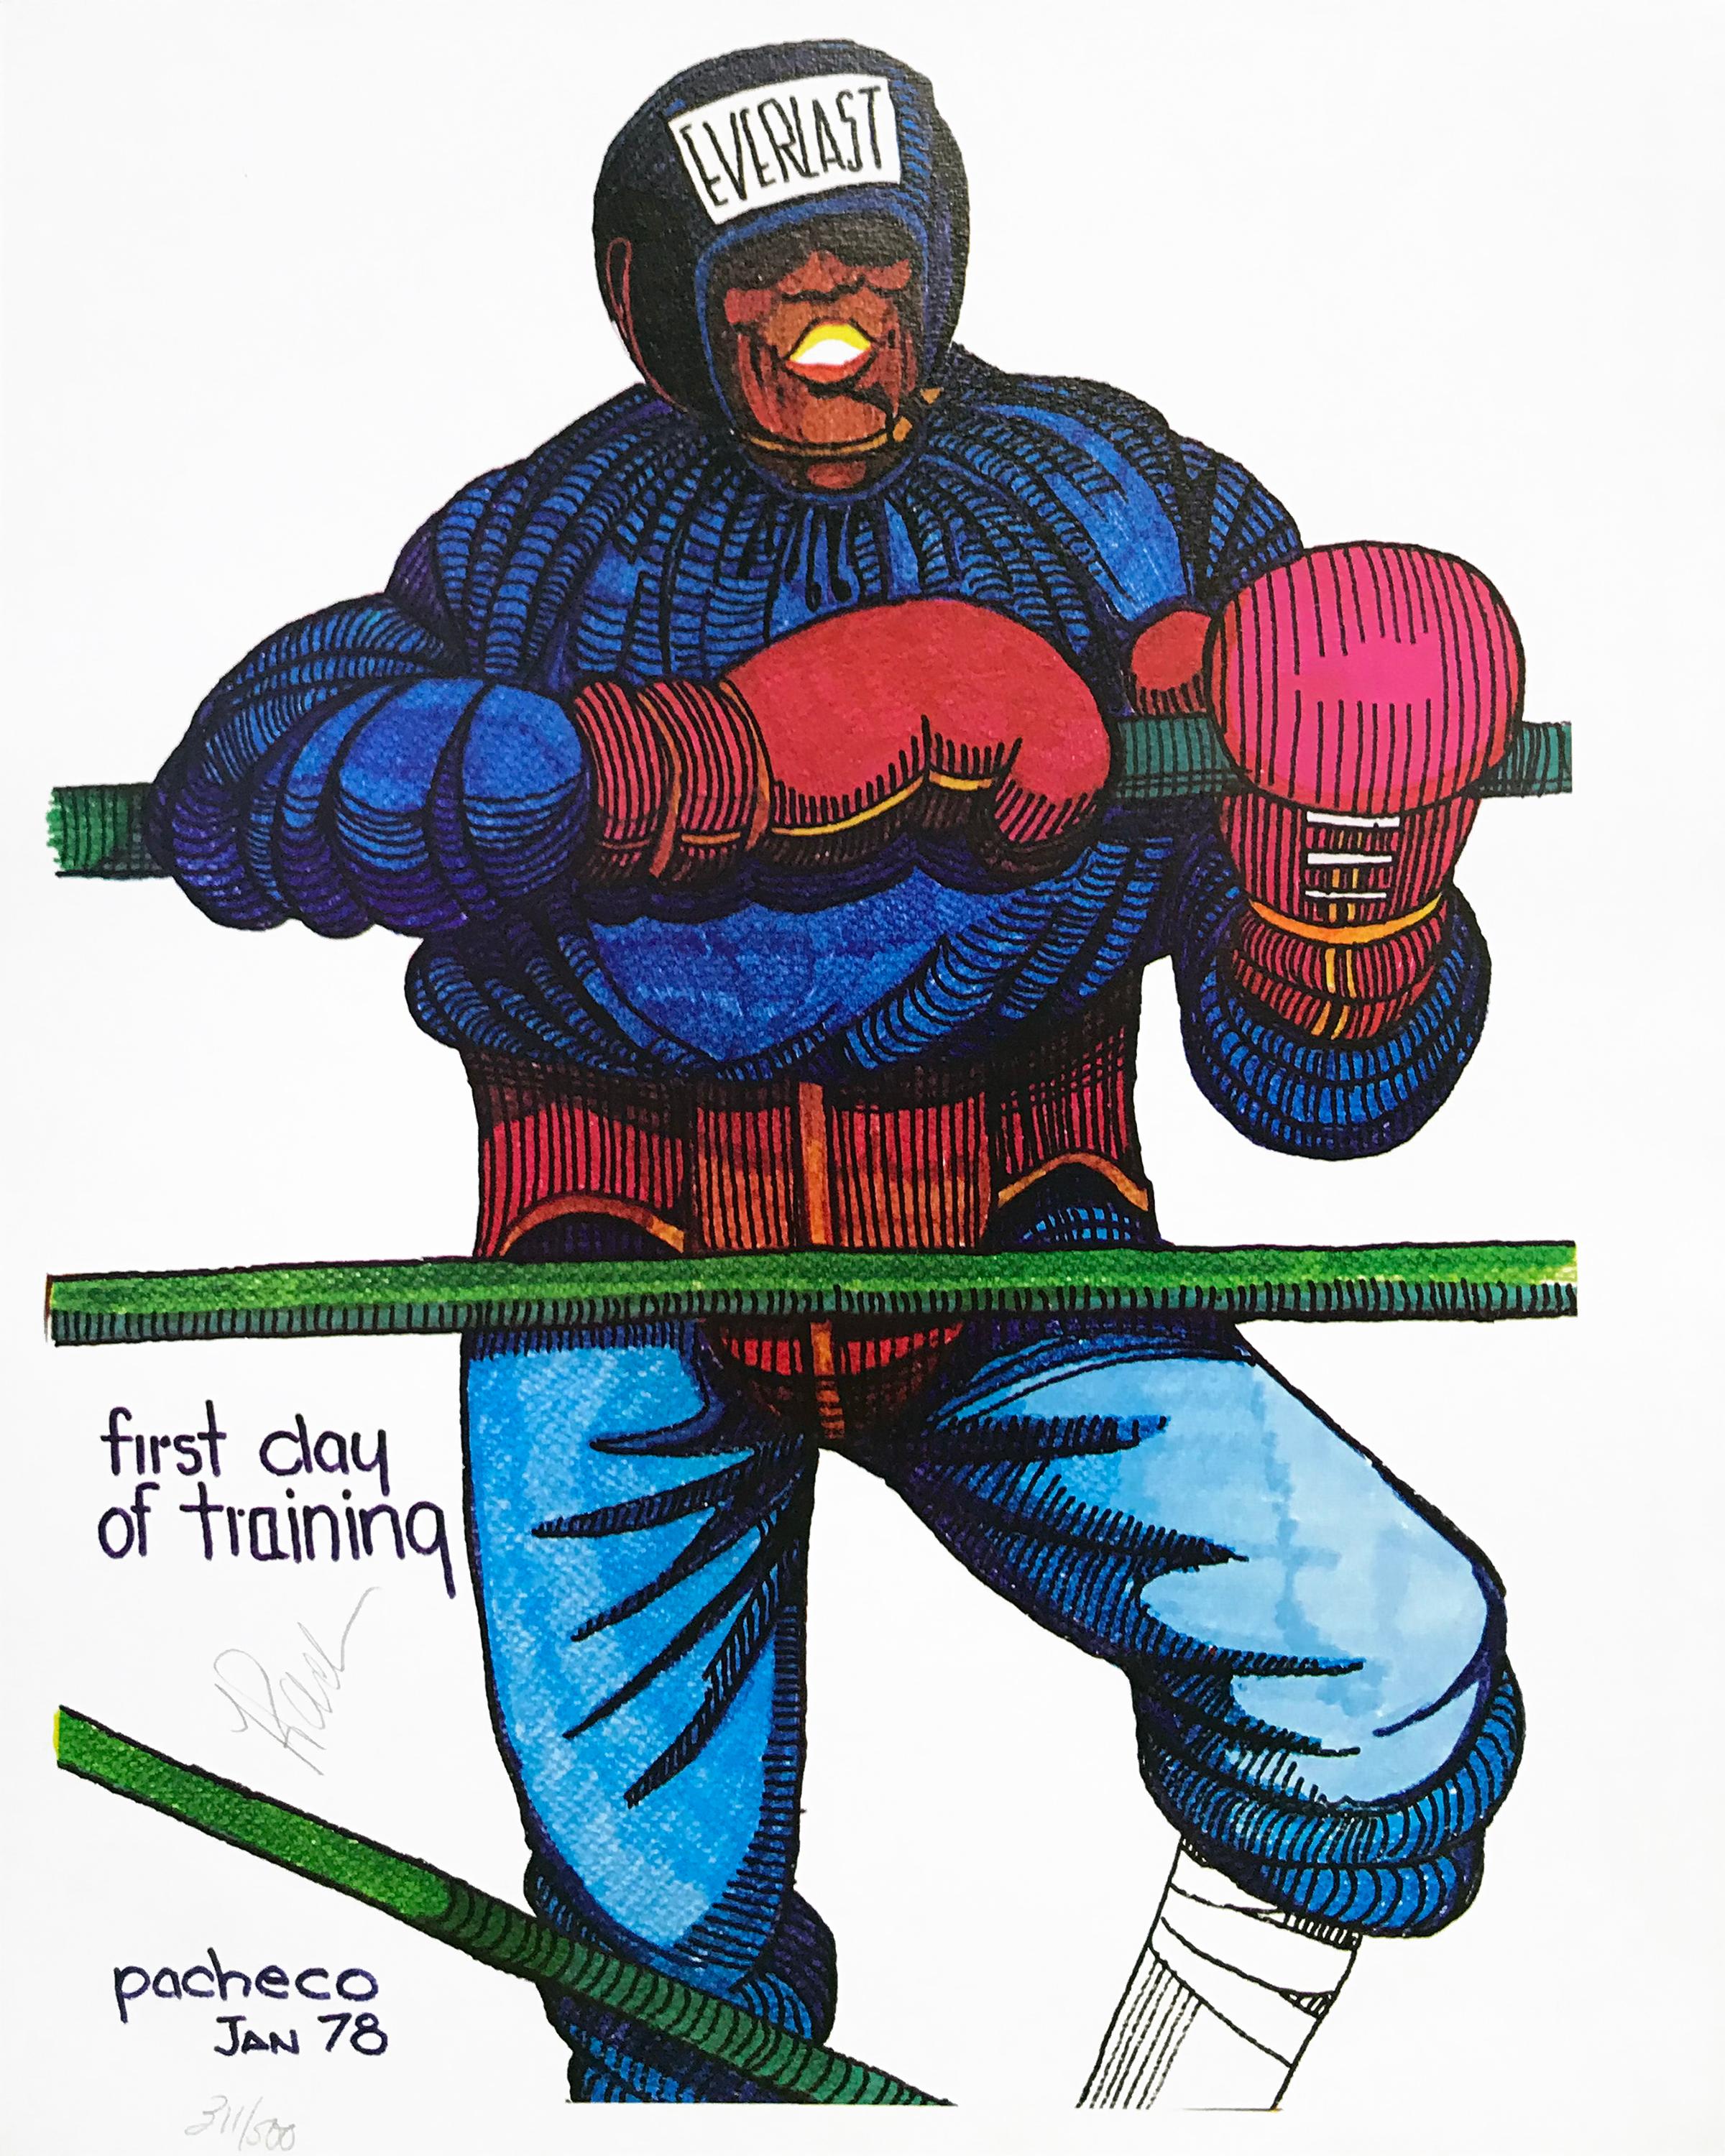 Ferdie Pacheco Figurative Print - FIRST DAY OF TRAINING (BOXING)